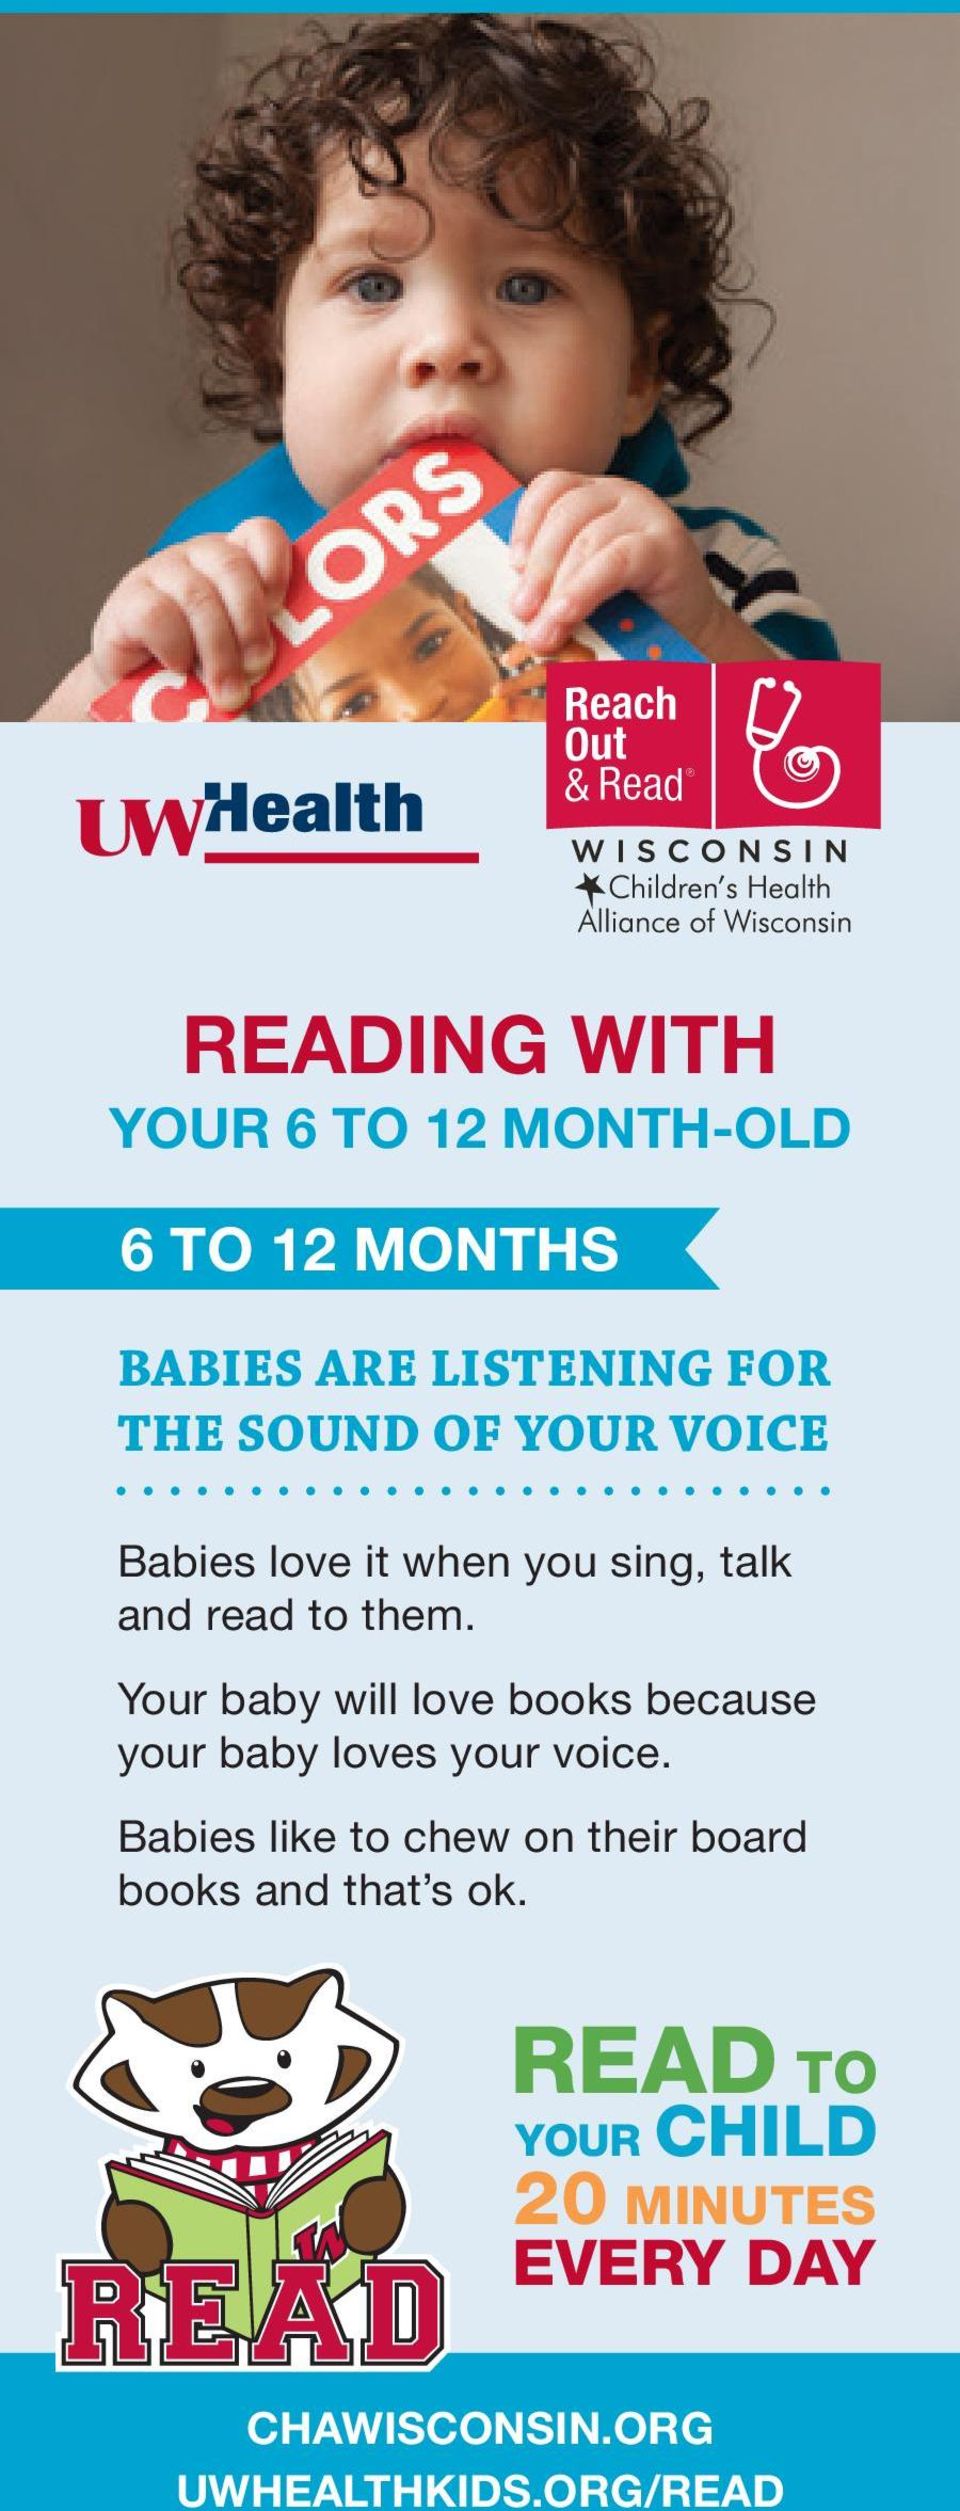 Your baby will love books because your baby loves your voice.